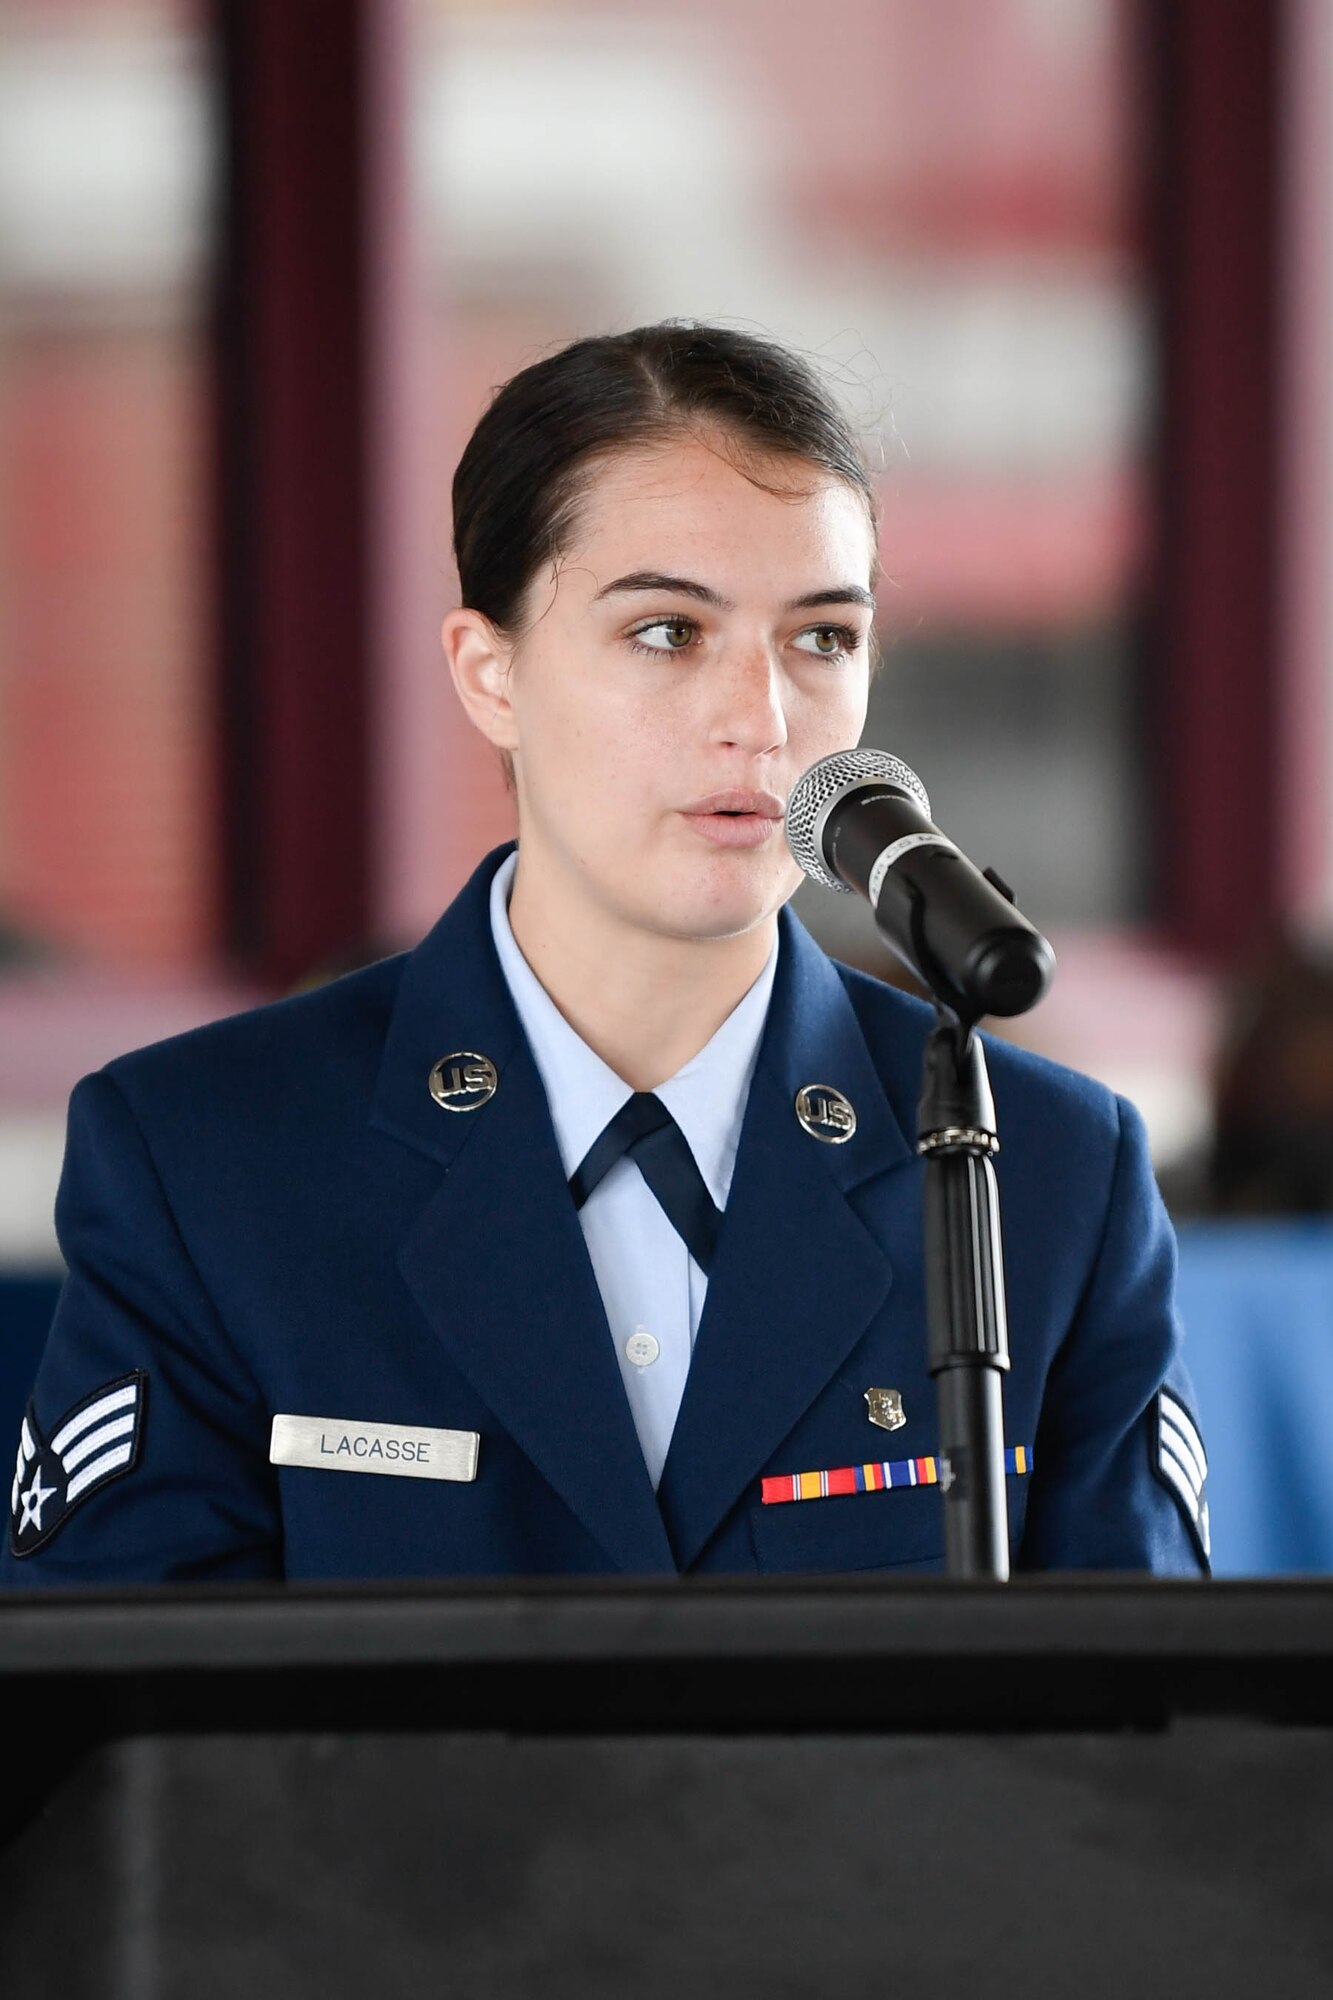 Senior Airman Kathleen Lacasse, 436th Health Care Operations Squadron Ambulance Response Team aerospace medical technician, reads the Emergency Medical Services Prayer during the 19th Anniversary 9/11 emorial event Sept. 11, 2020, at Dover Air Force Base, Delaware. Members of Team Dover volunteer to participate in the annual memorial event to remember and honor the civilian casualties and the fallen firefighters, police officers and first responders. (U.S. Air Force photo by Mauricio Campino)